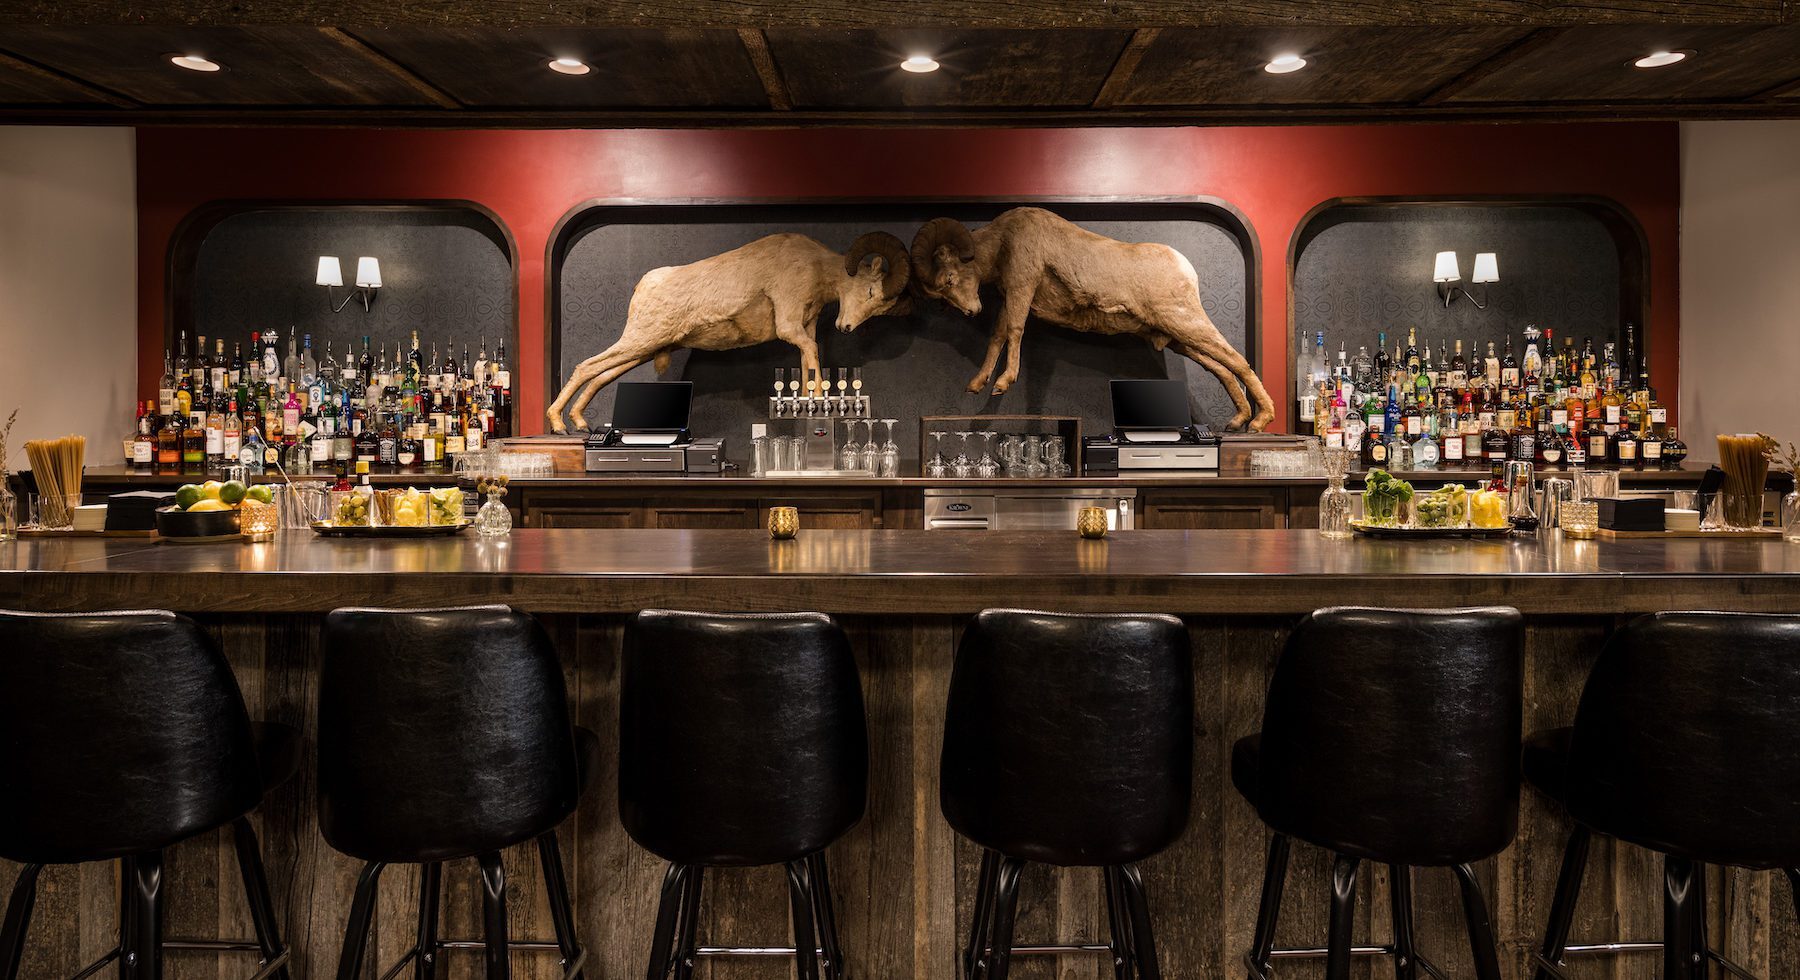 Chairs neatly arranged by the bar counter, with a display featuring a longhorn goat fighting theme.